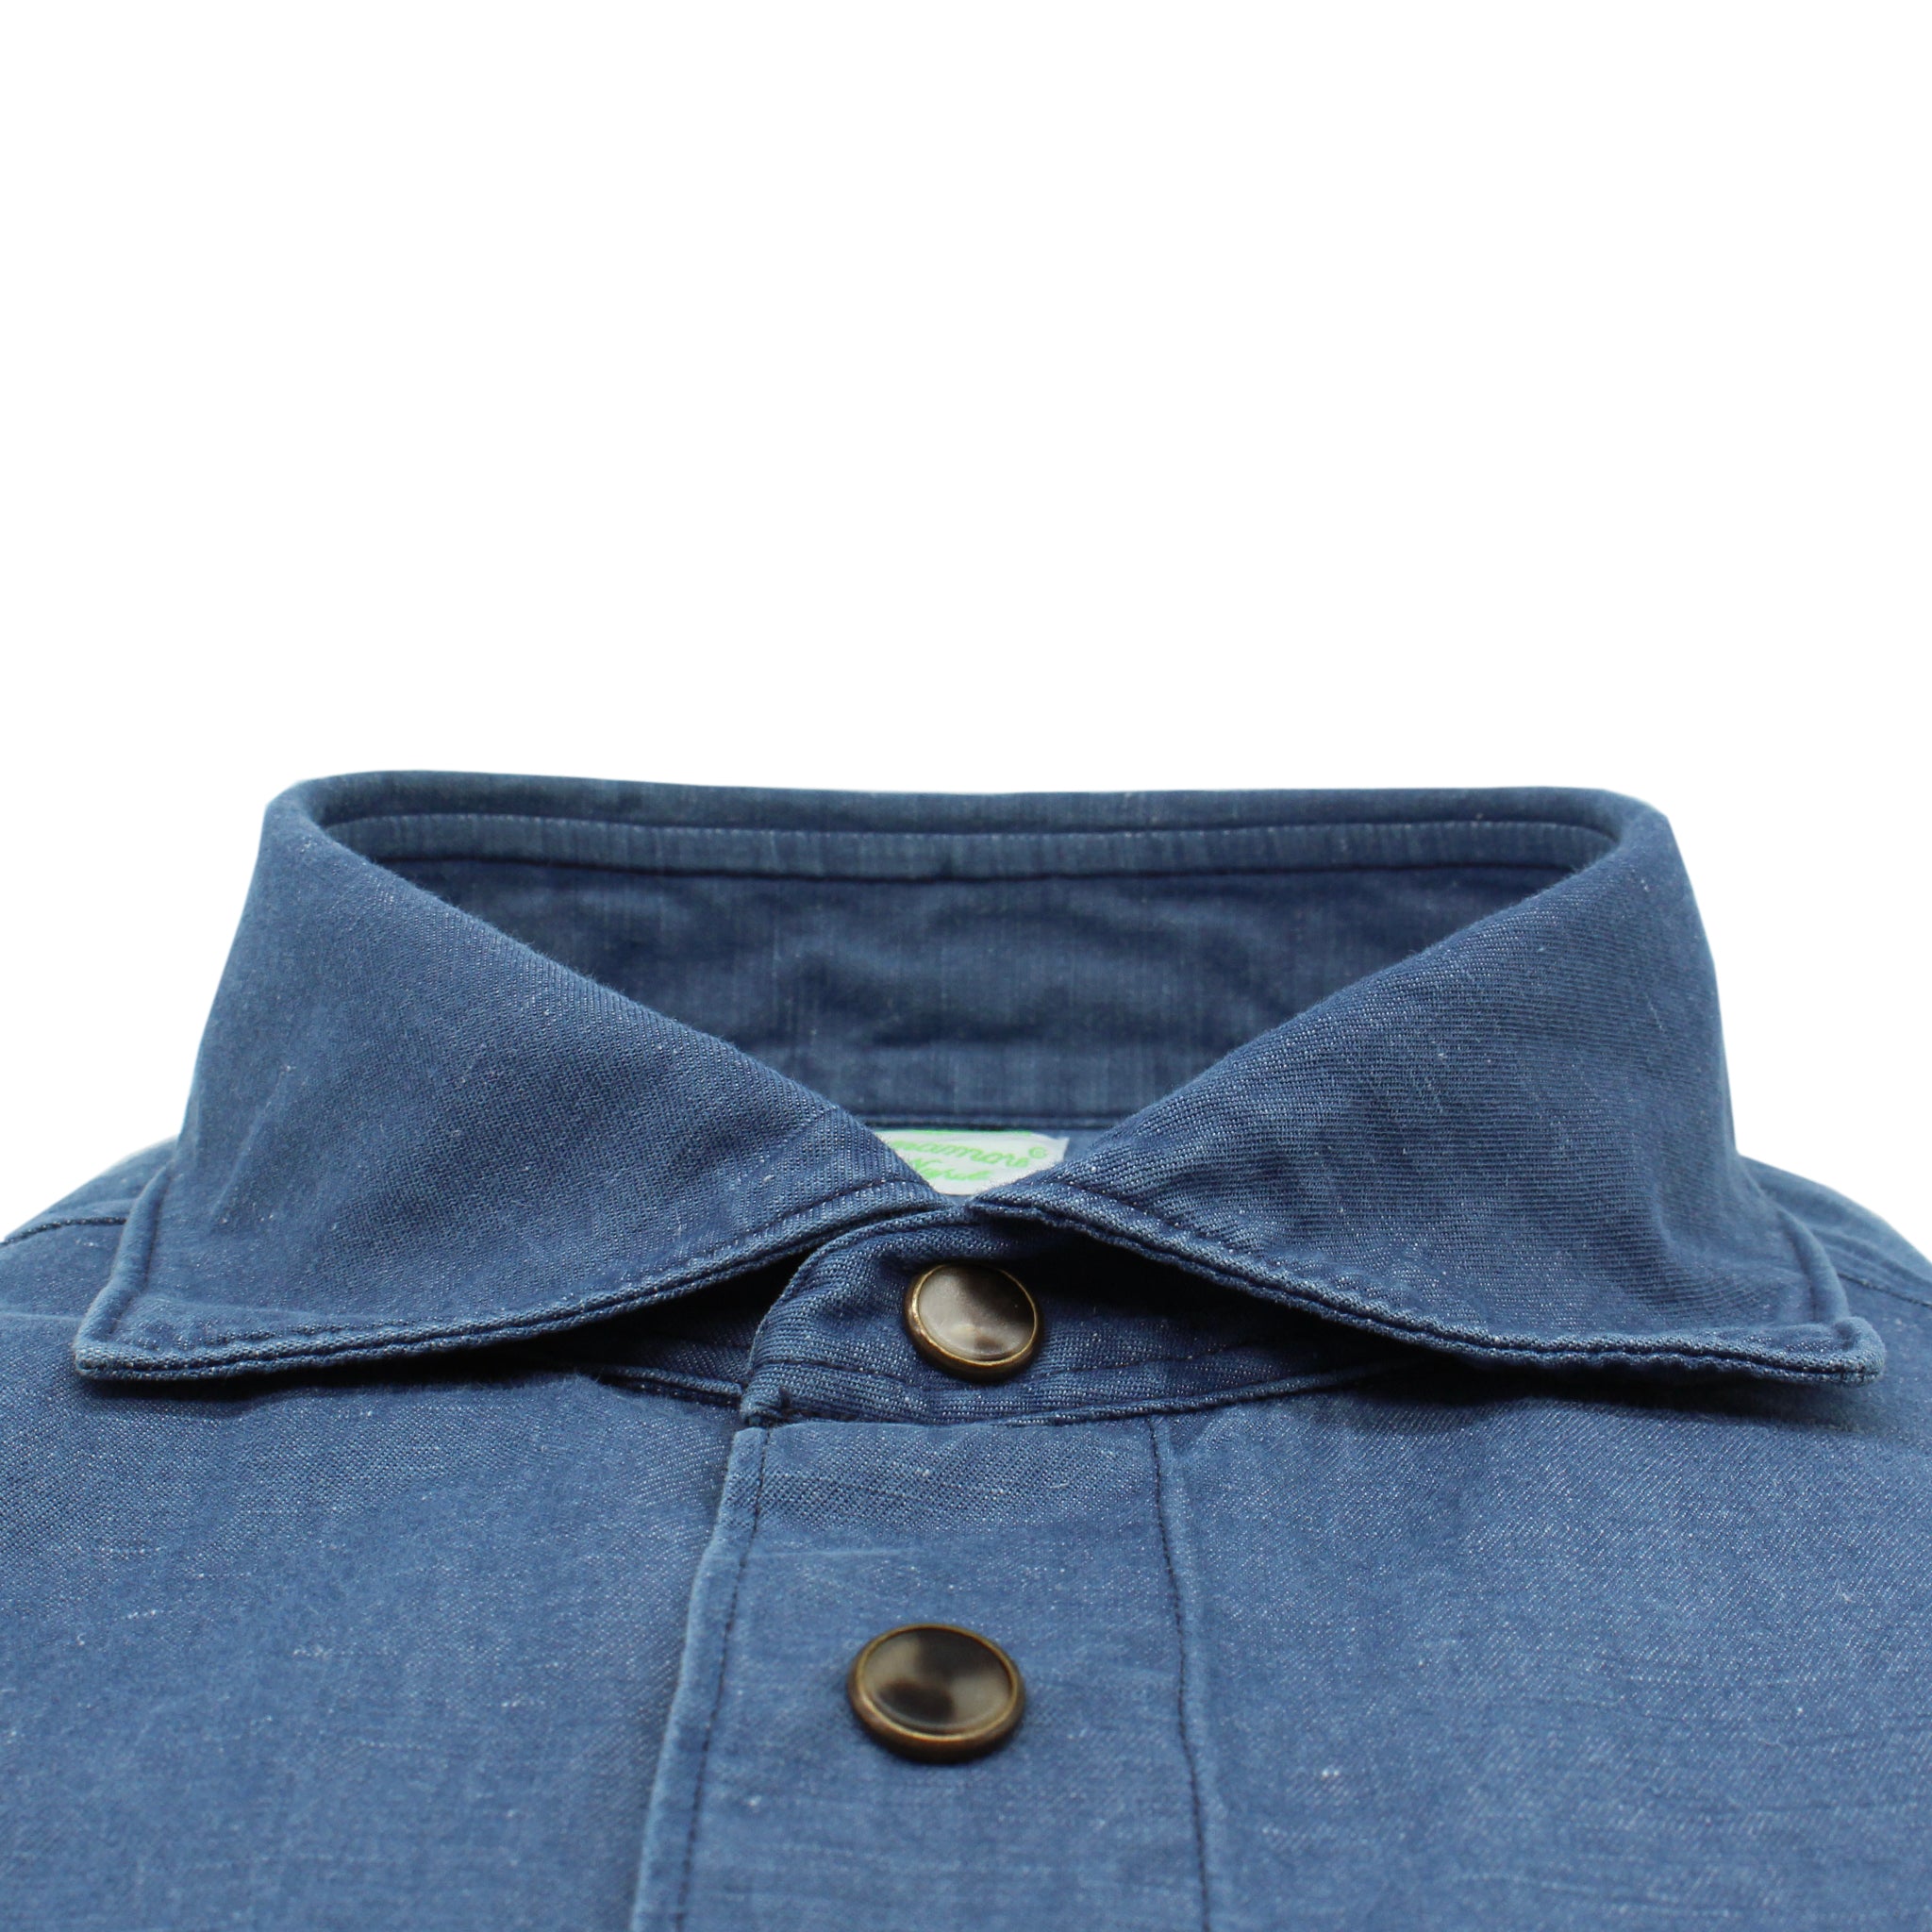 Slim fit shirt with pockets and denim push button closure